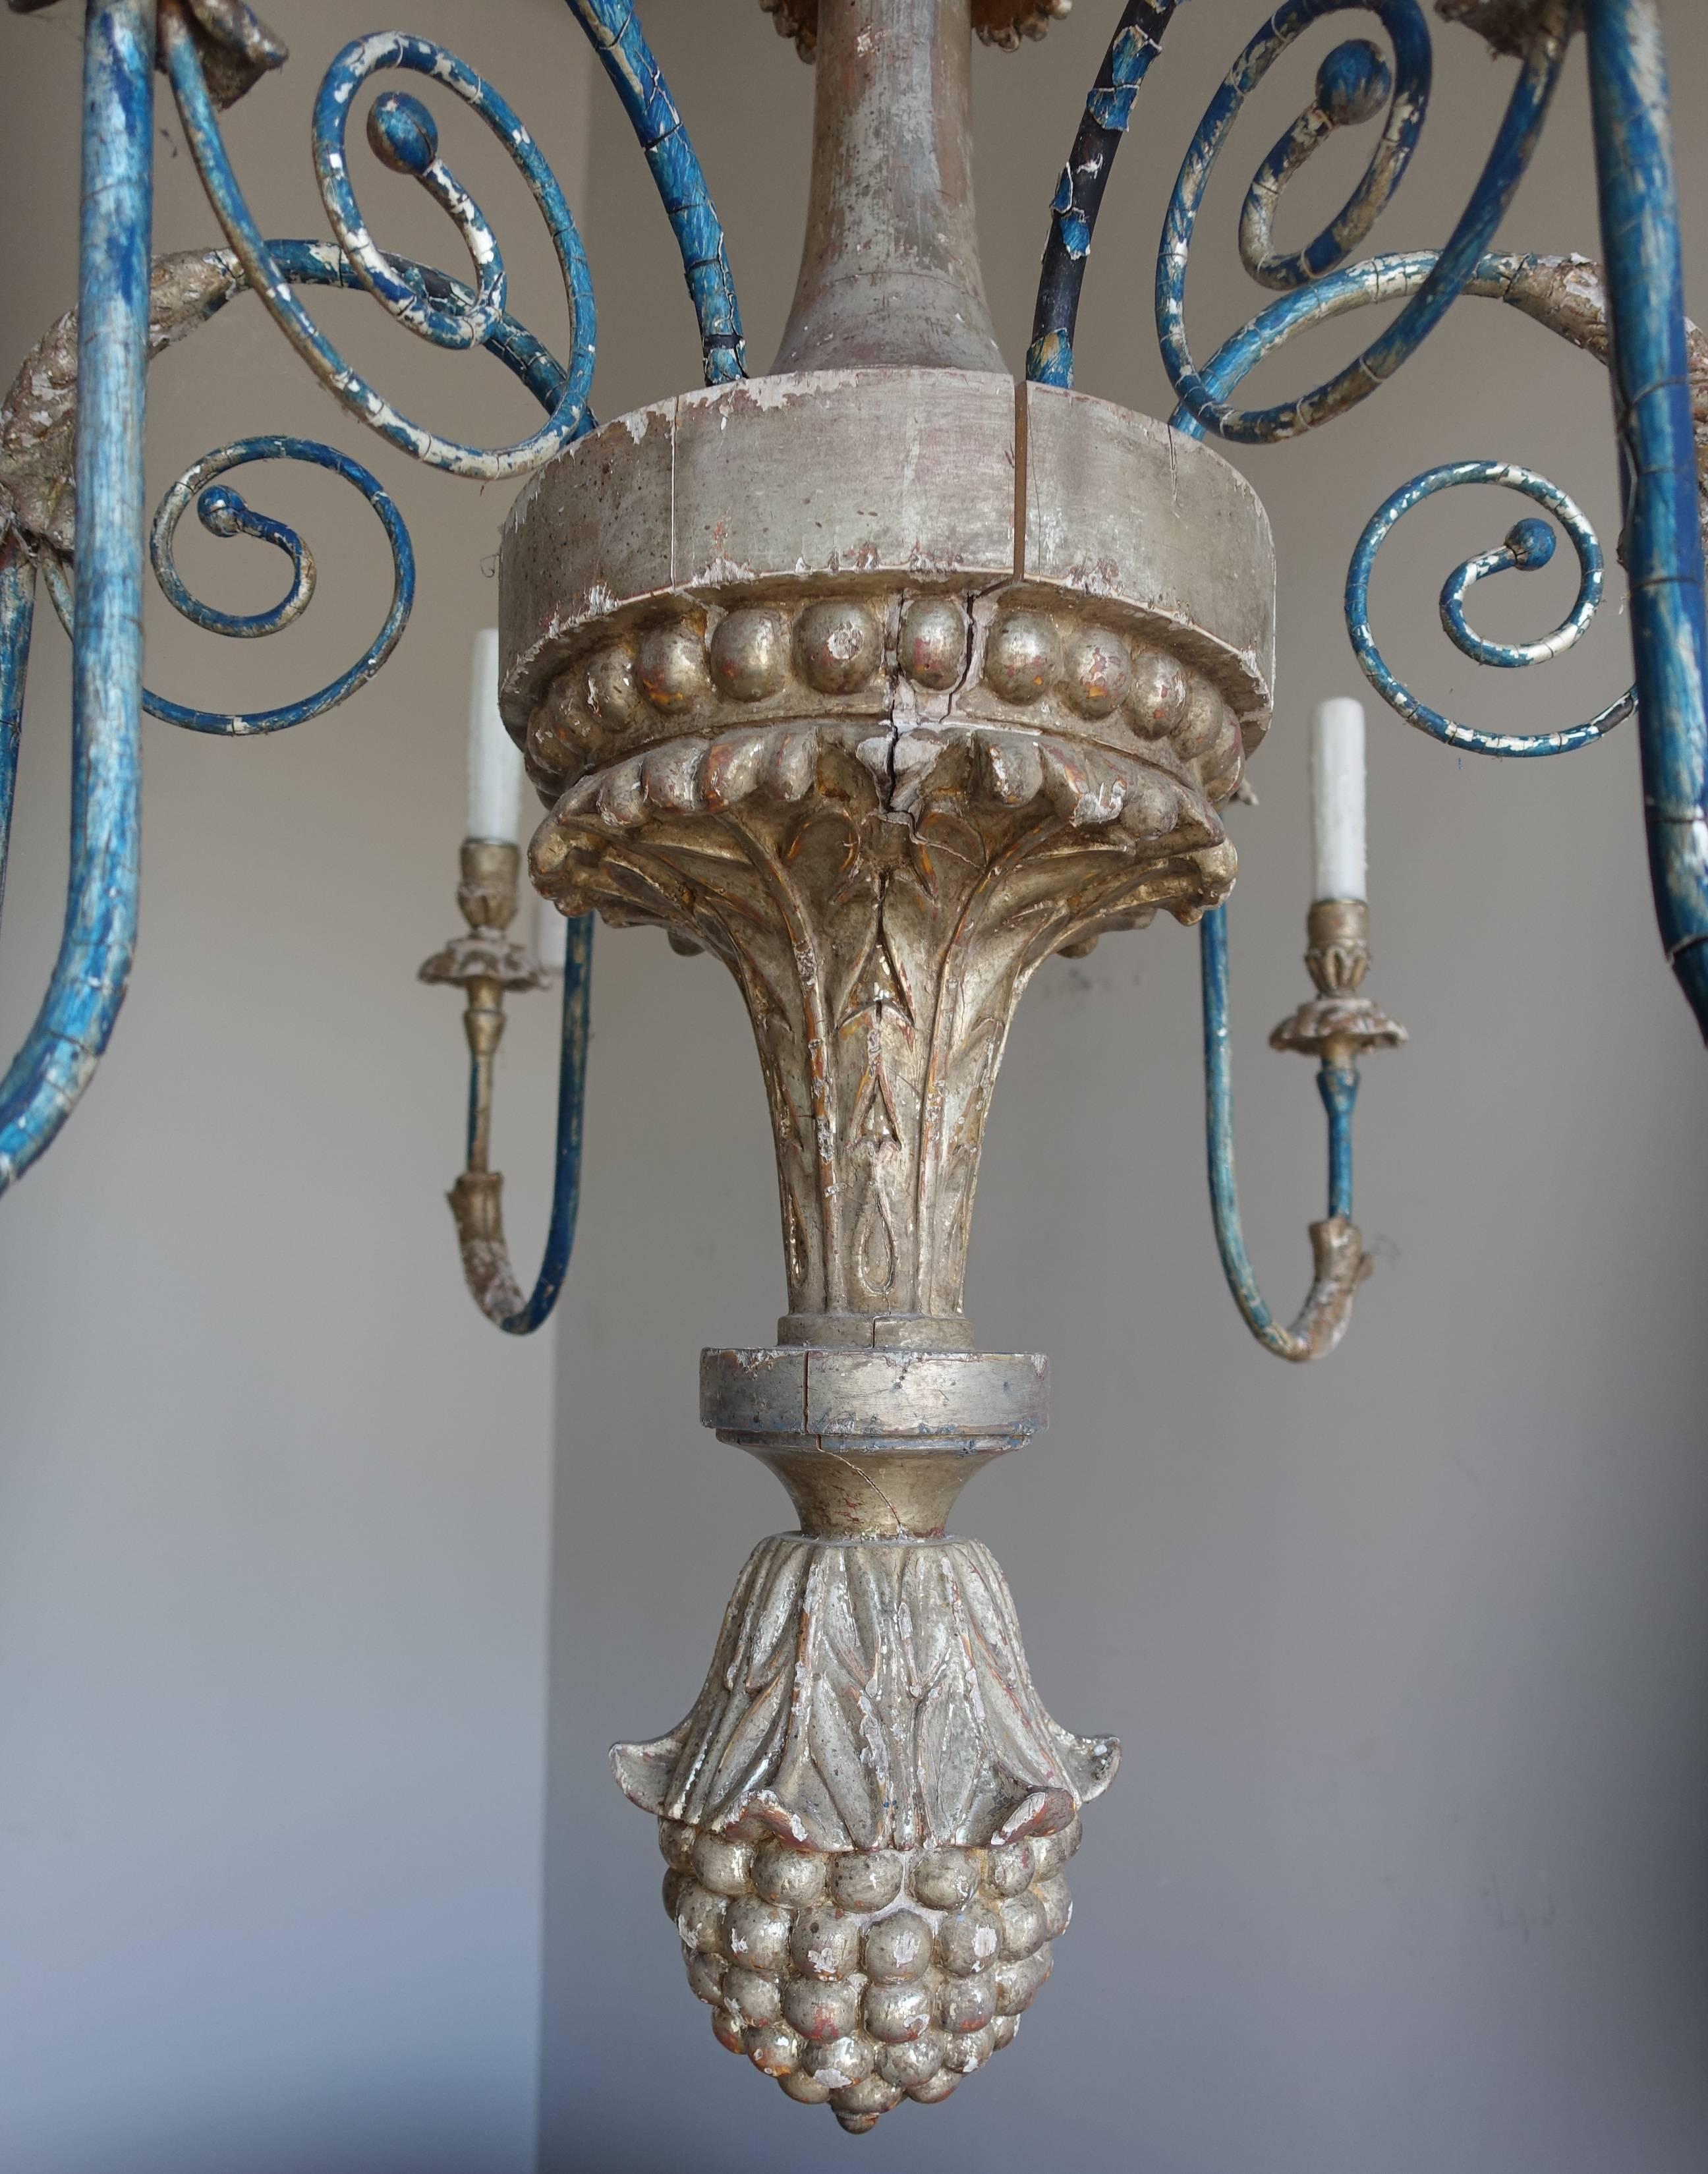 Six-light Italian carved silver gilt chandelier with blue painted wrought iron arms that have been newly wired with drip wax candle covers. Includes chain and canopy.